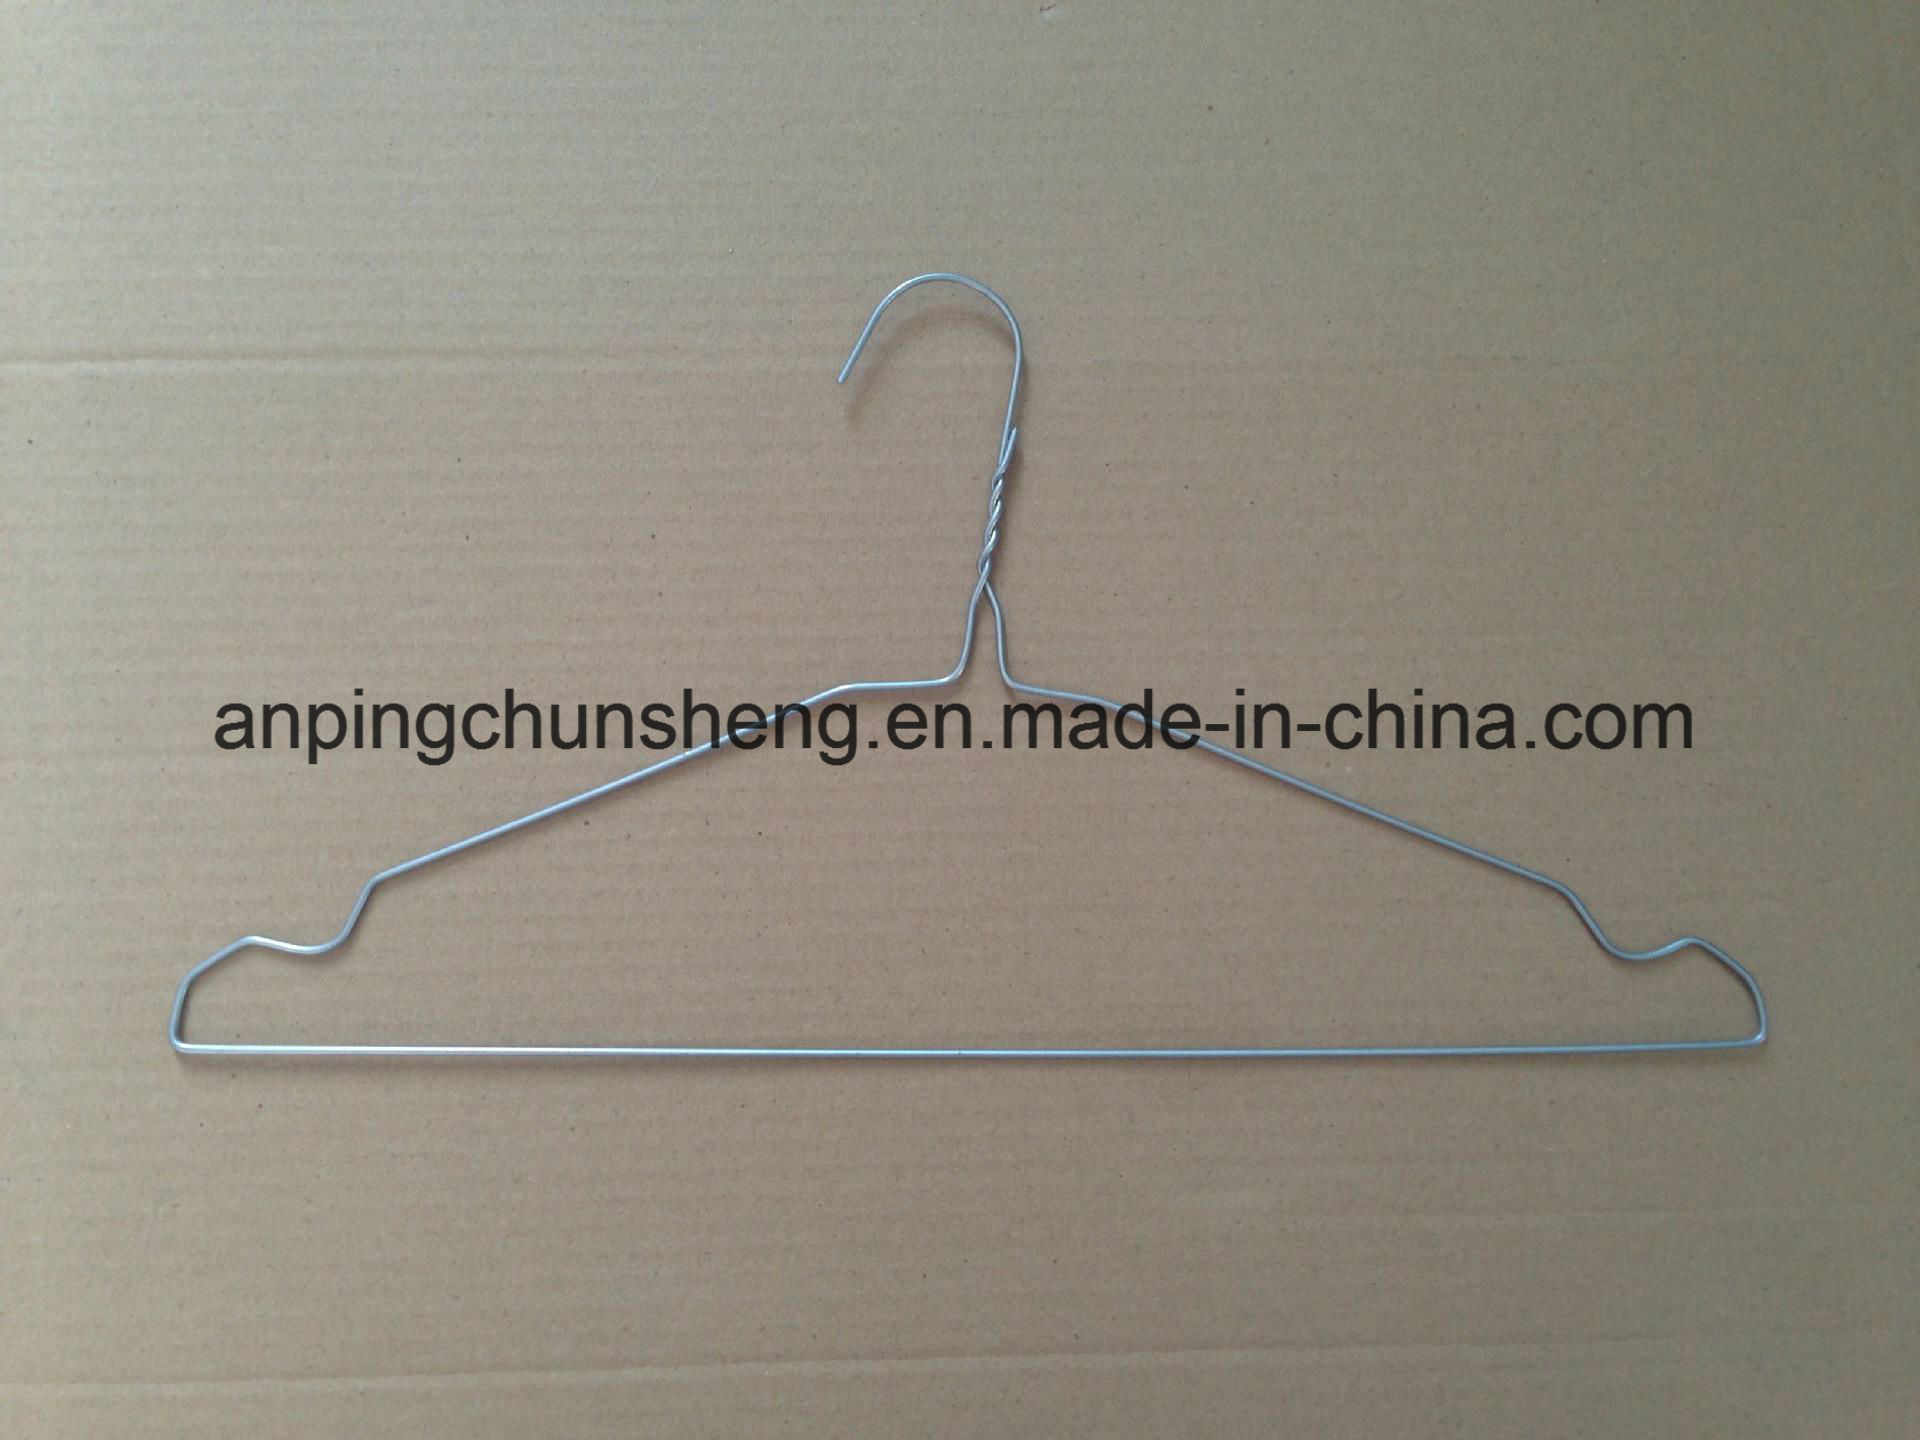 Powder Coated Wire Hanger for Simply Laundry